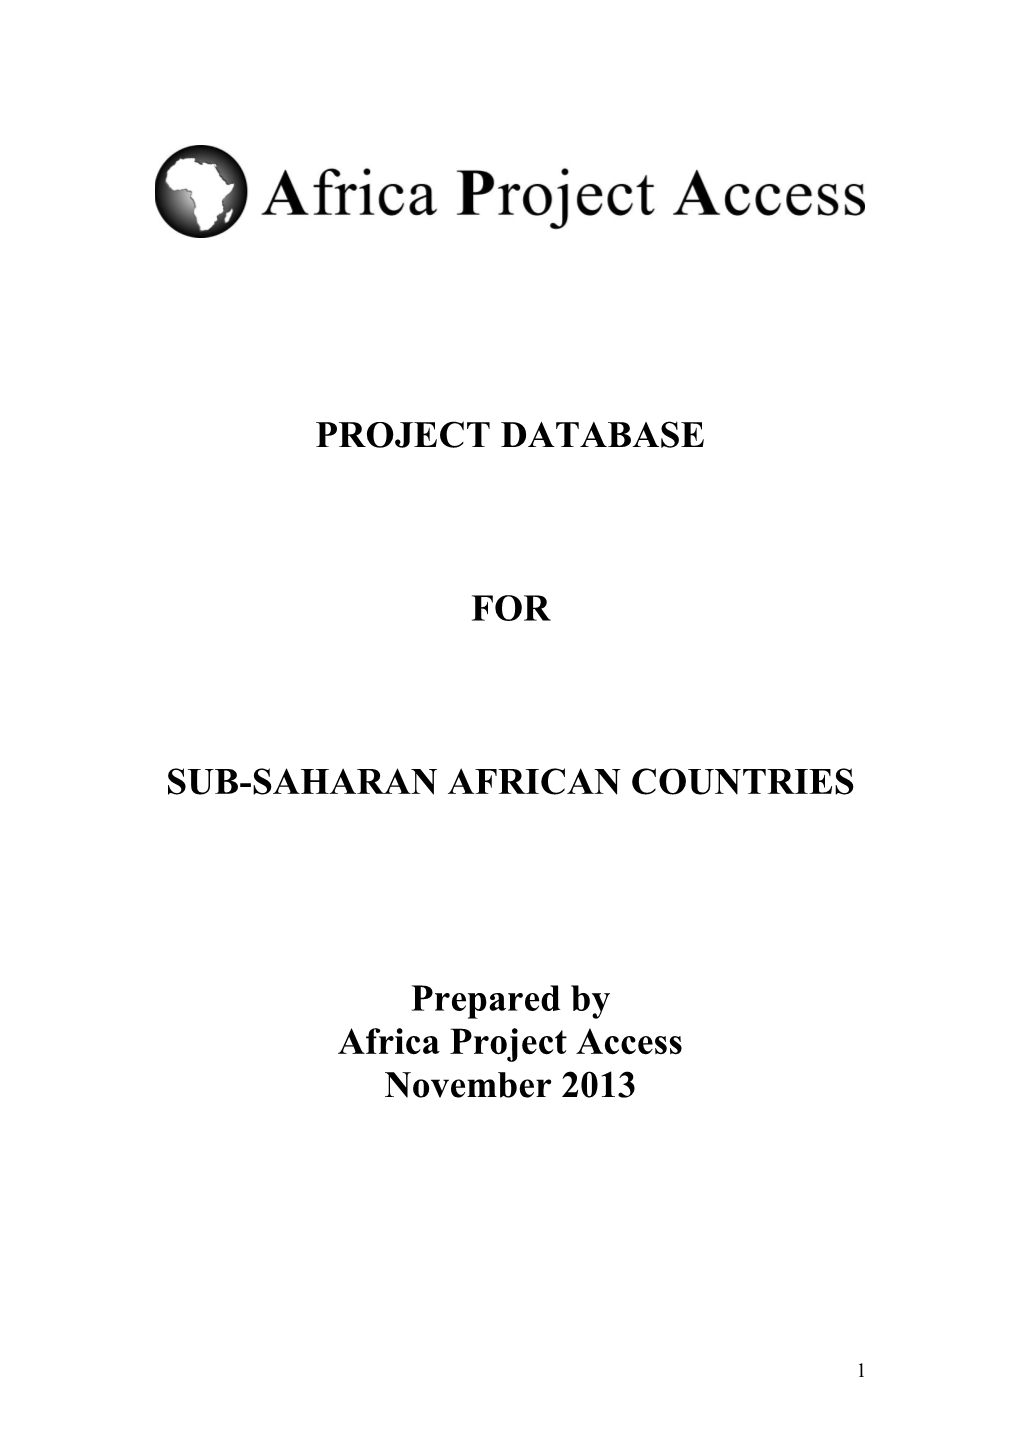 Project Database for Sub-Saharan African